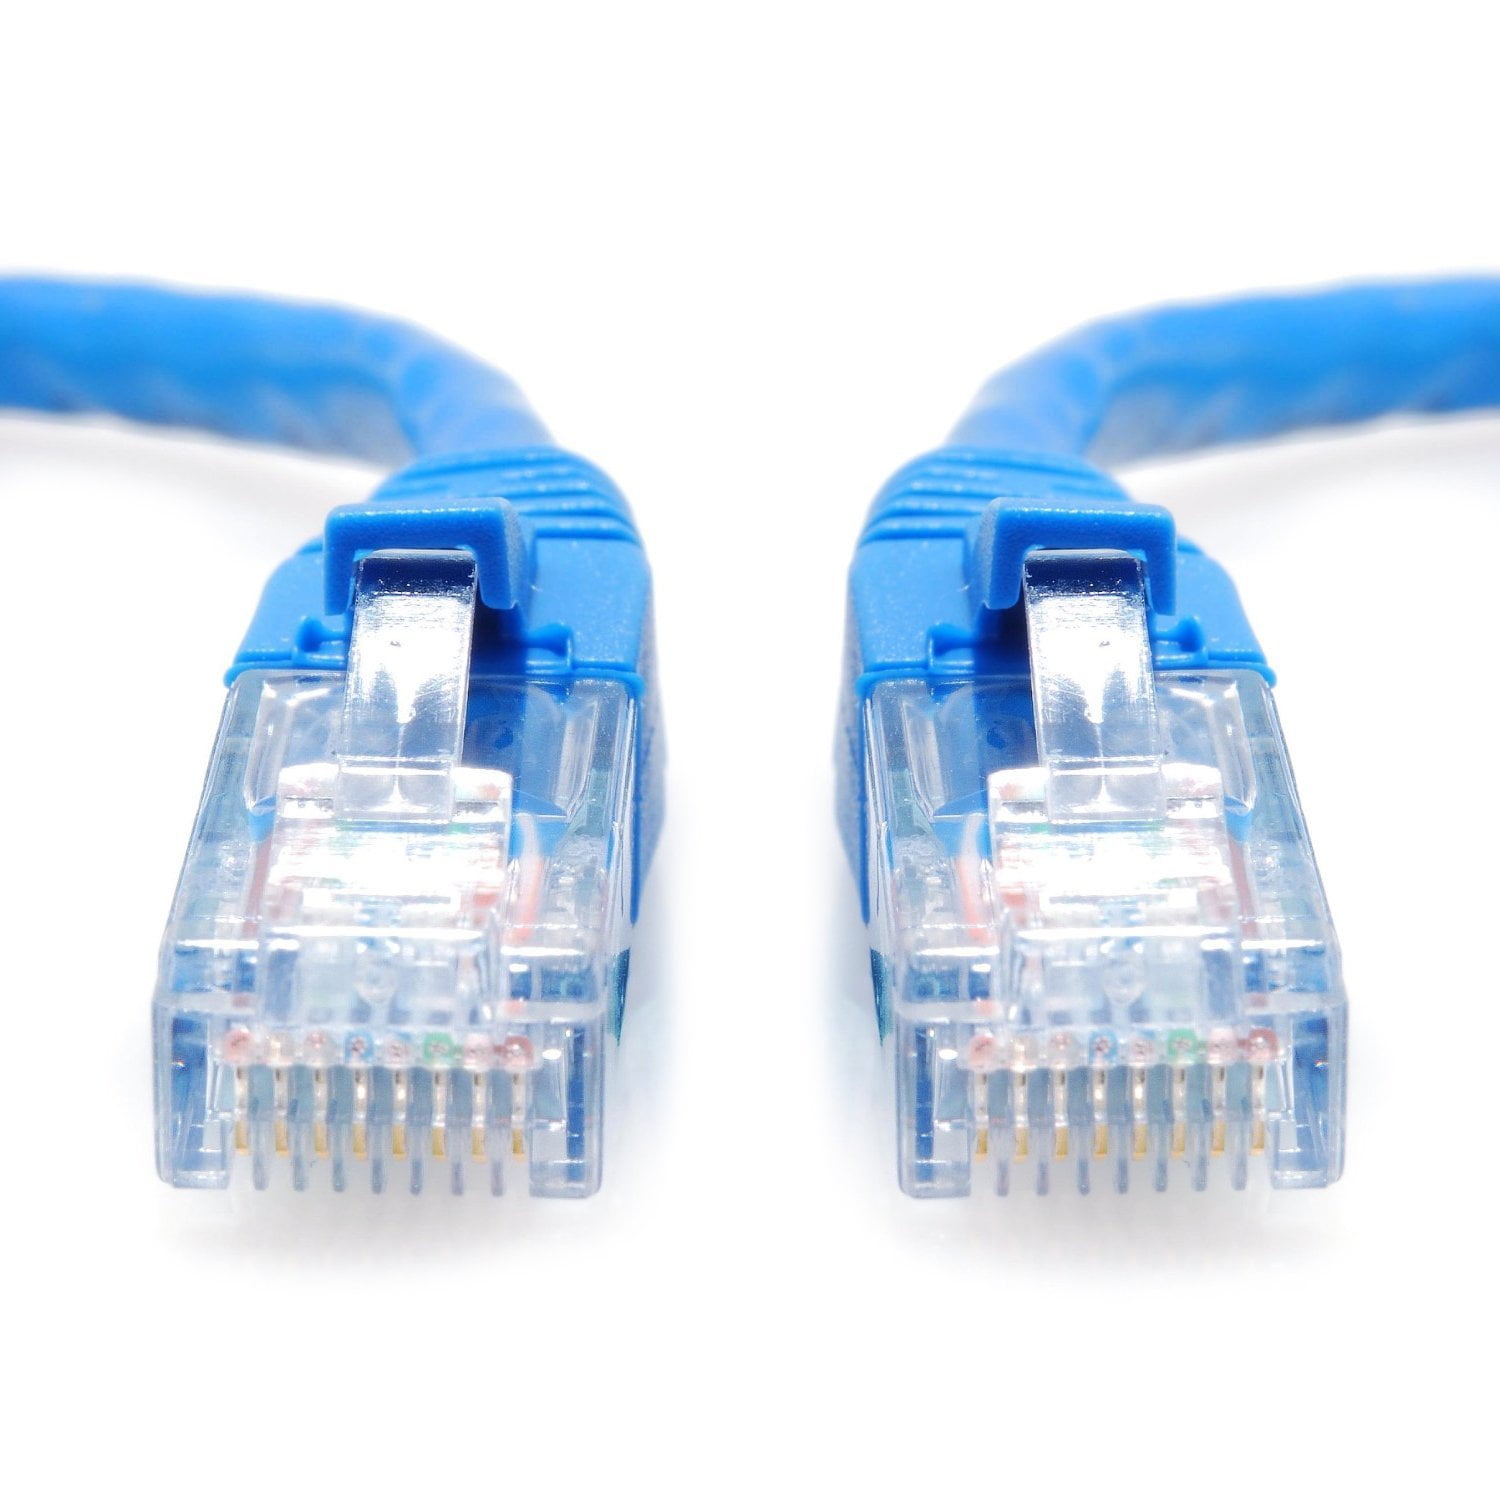 Mediabridge Ethernet Cable 50 Feet - Supports Cat6 / Cat5e / Cat5 Standards 550MHz 10Gbps Part# 31-299-50B RJ45 Computer Networking Cord 